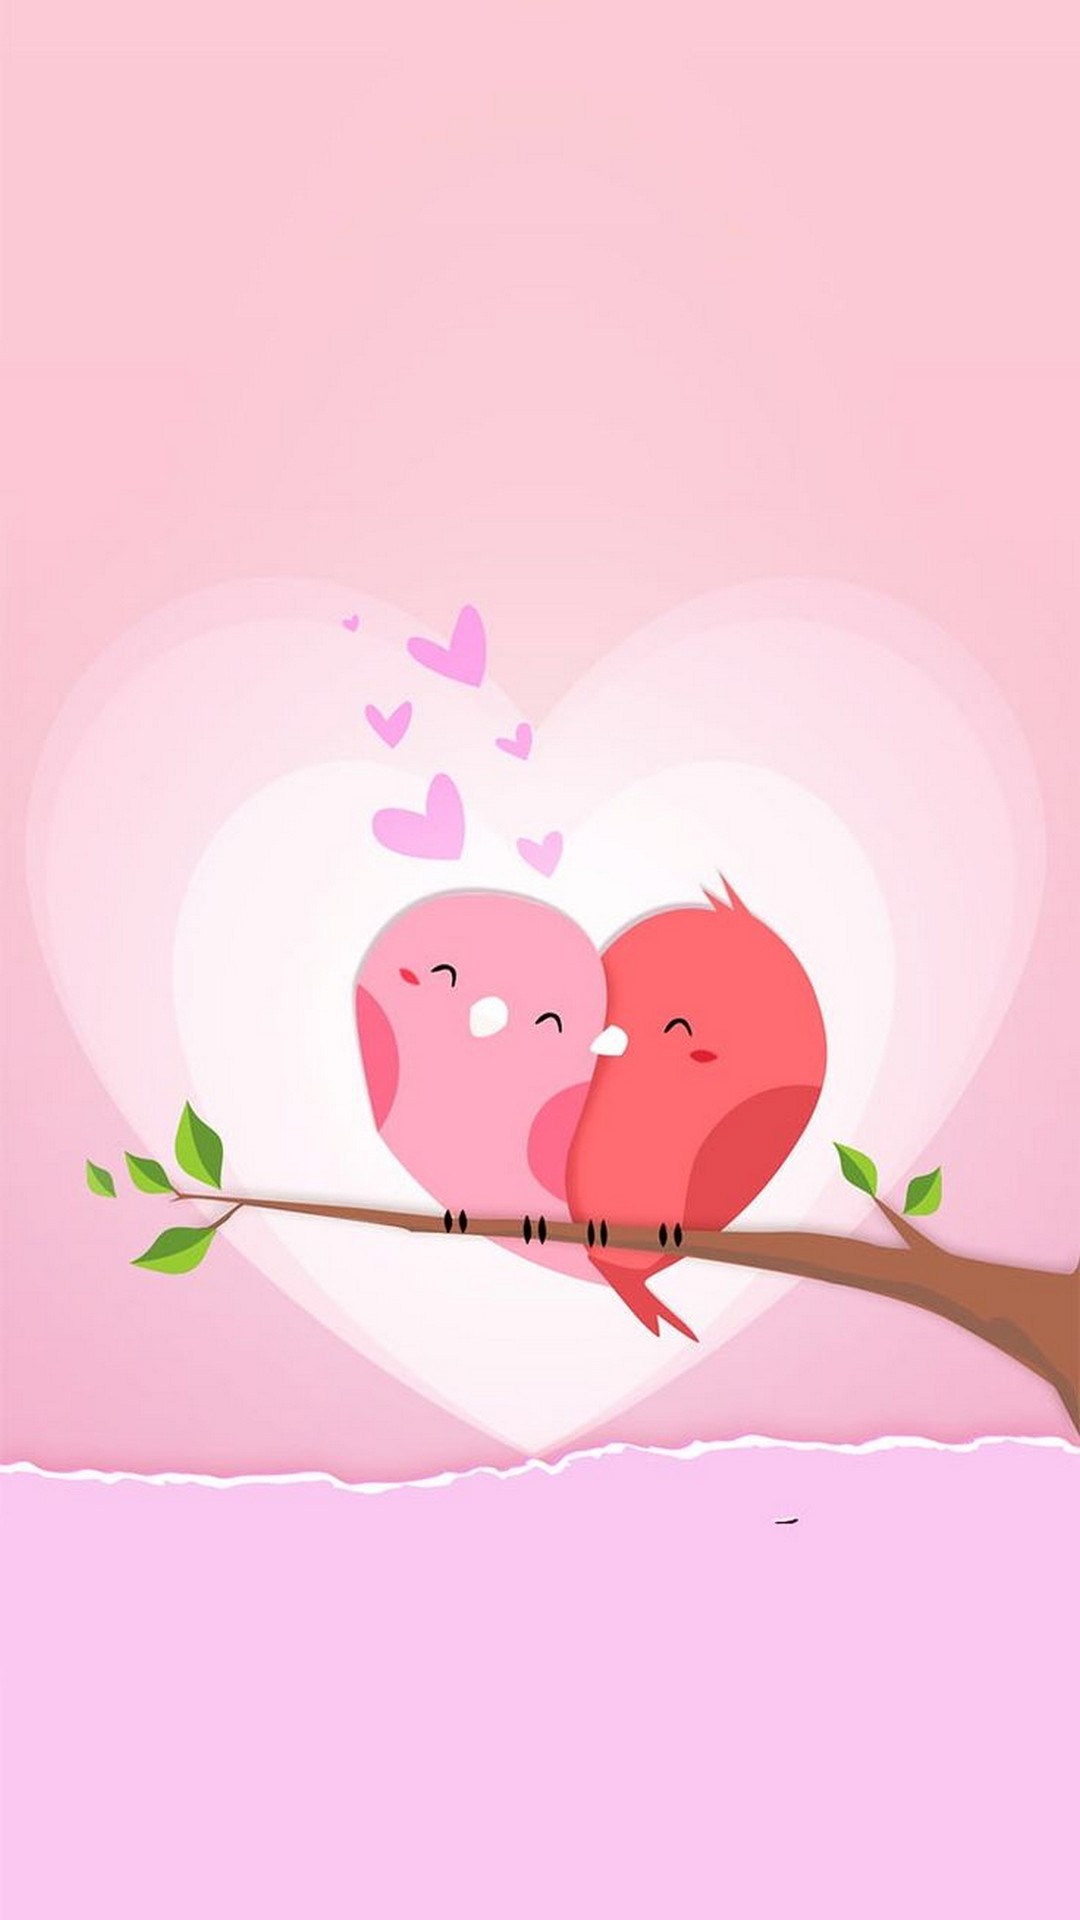 Free Valentines Day iPhone Wallpaper, Valentines Day iPhone Wallpaper Download